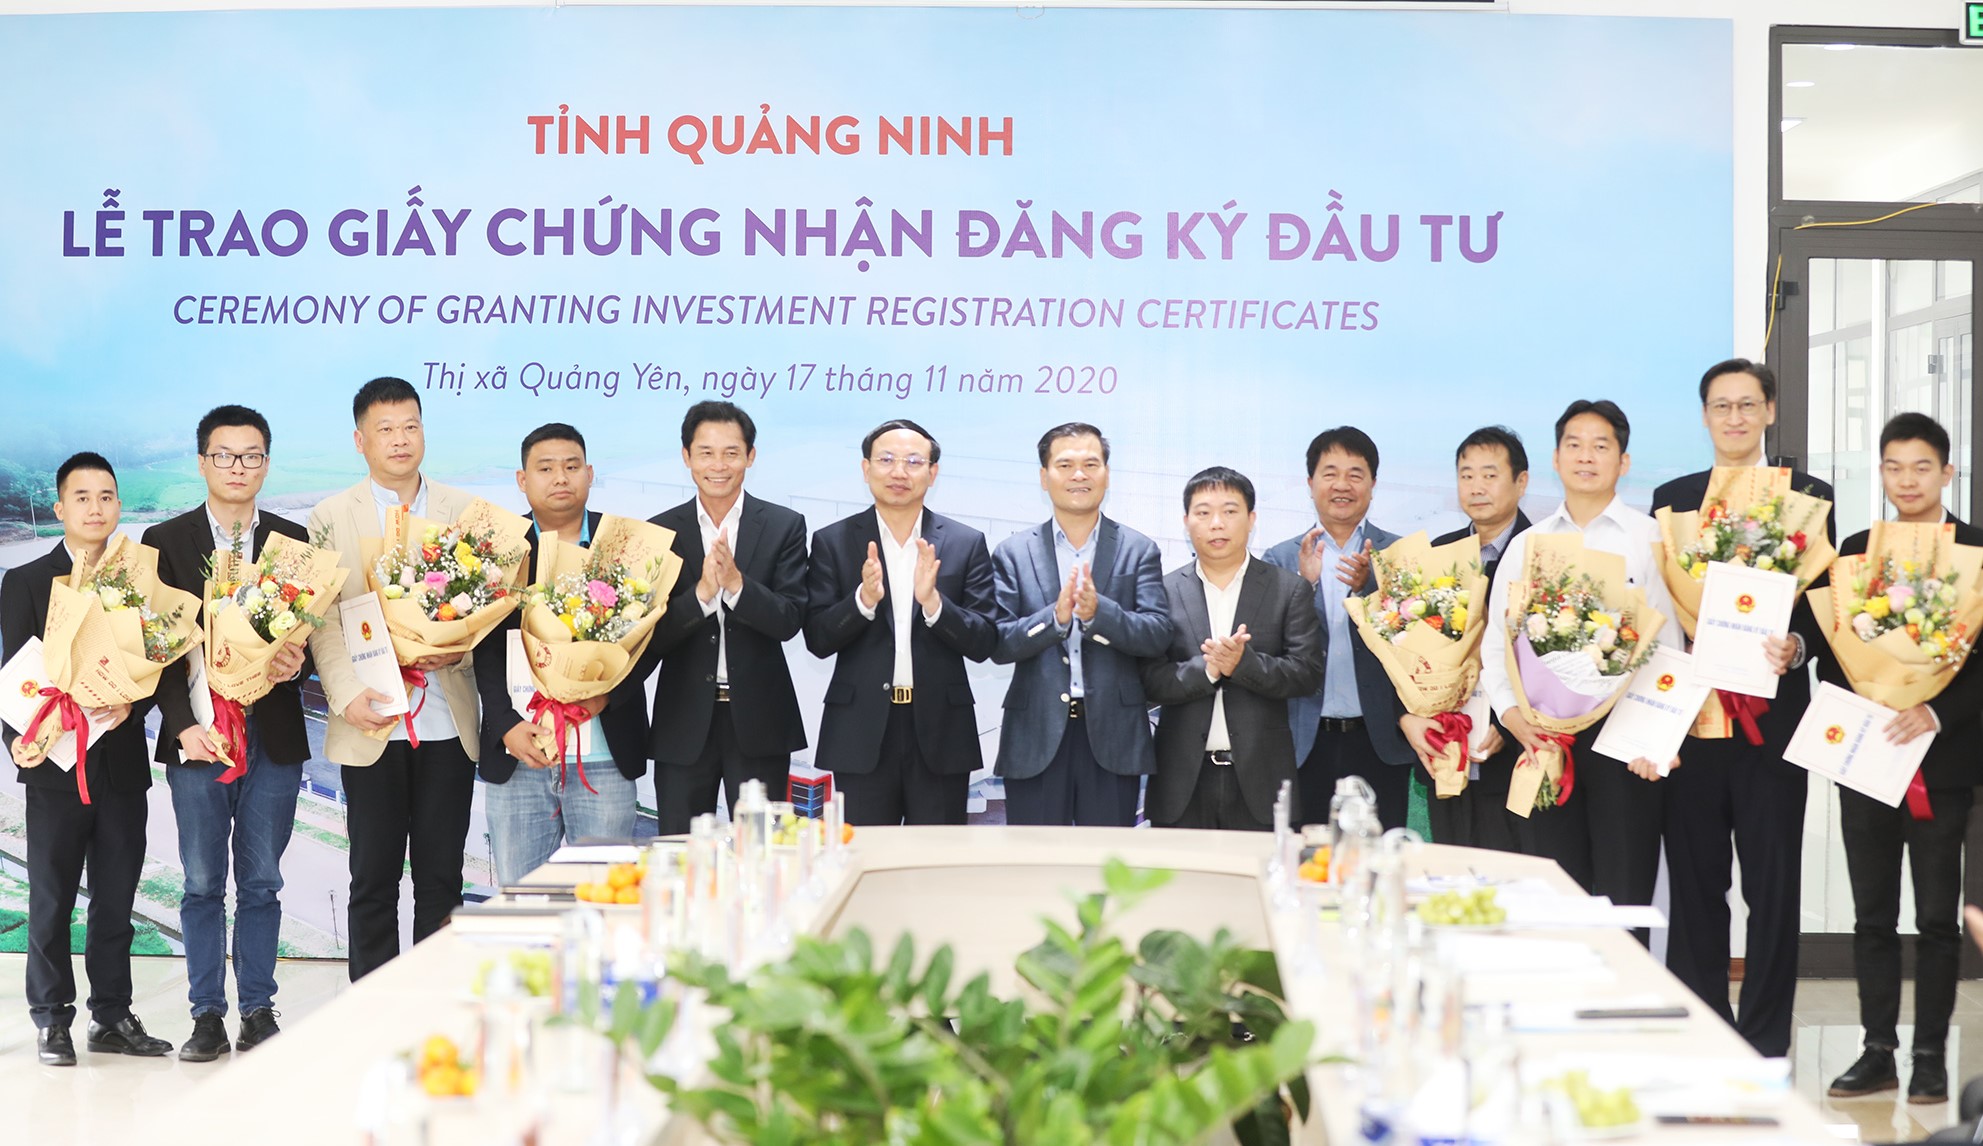 Quang Ninh province: Awarded investment registration certificates for 9 projects in Viglacera industrial parks